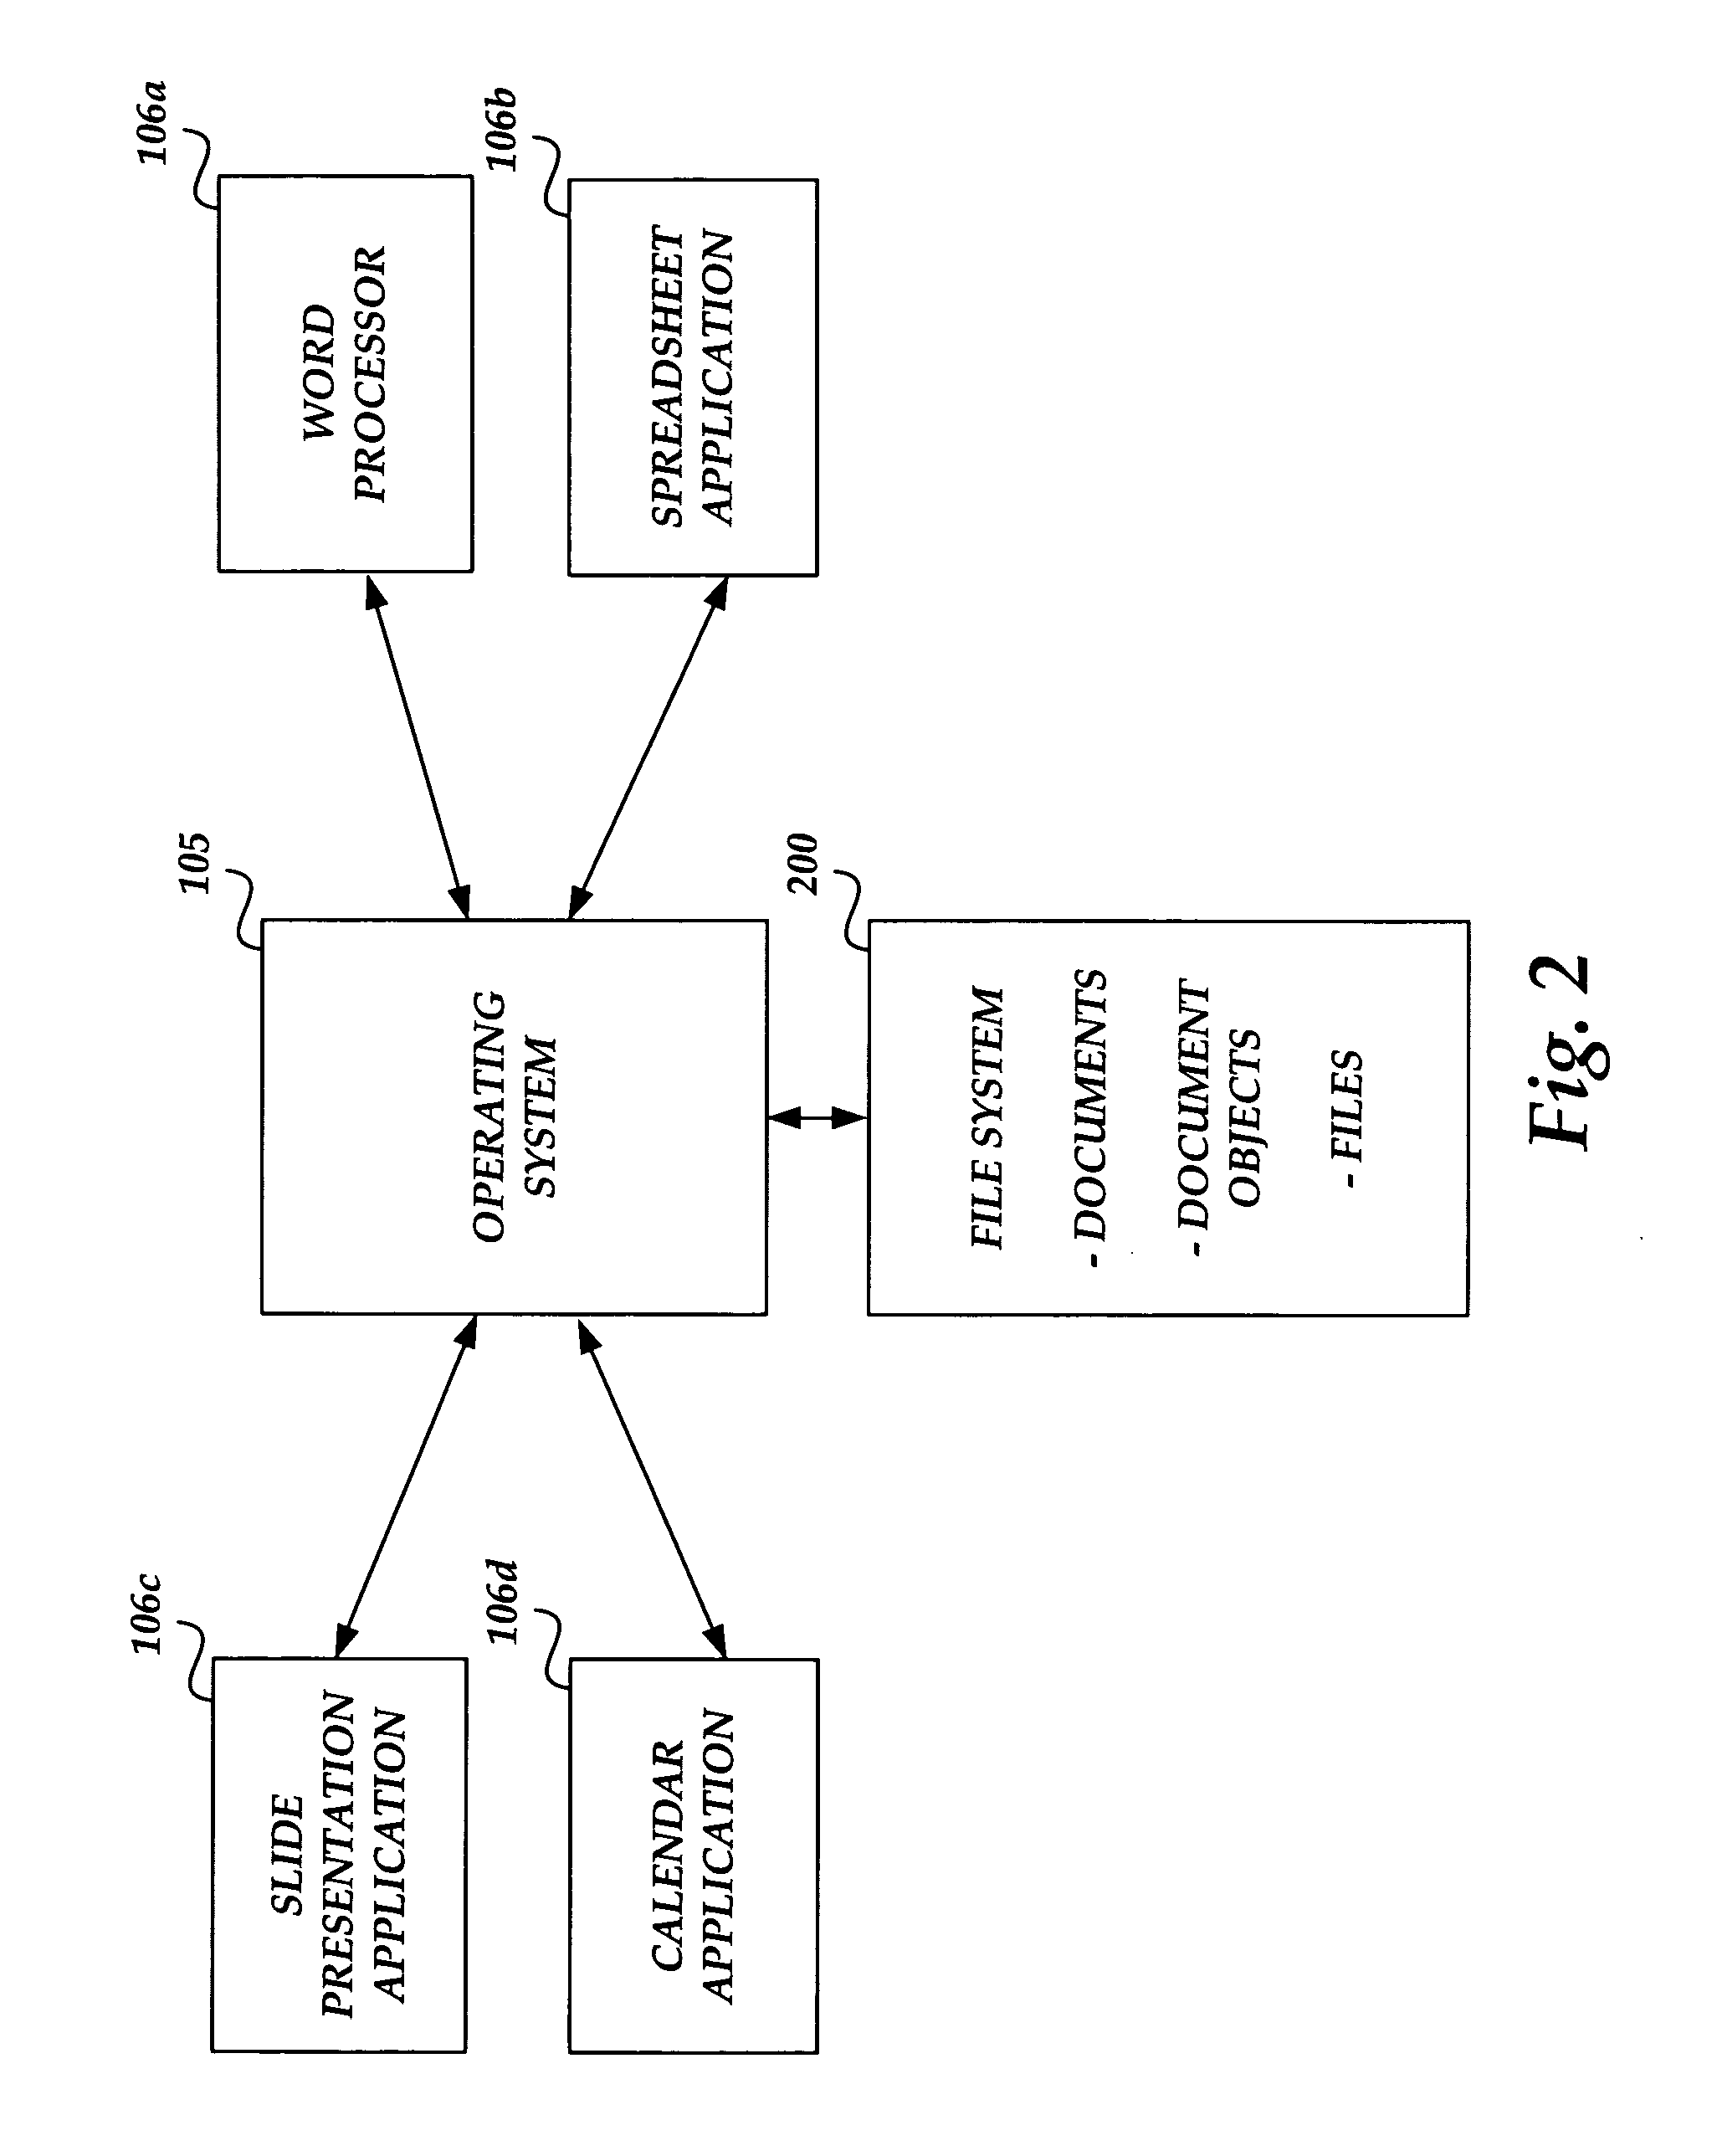 Application of metadata to documents and document objects via a software application user interface